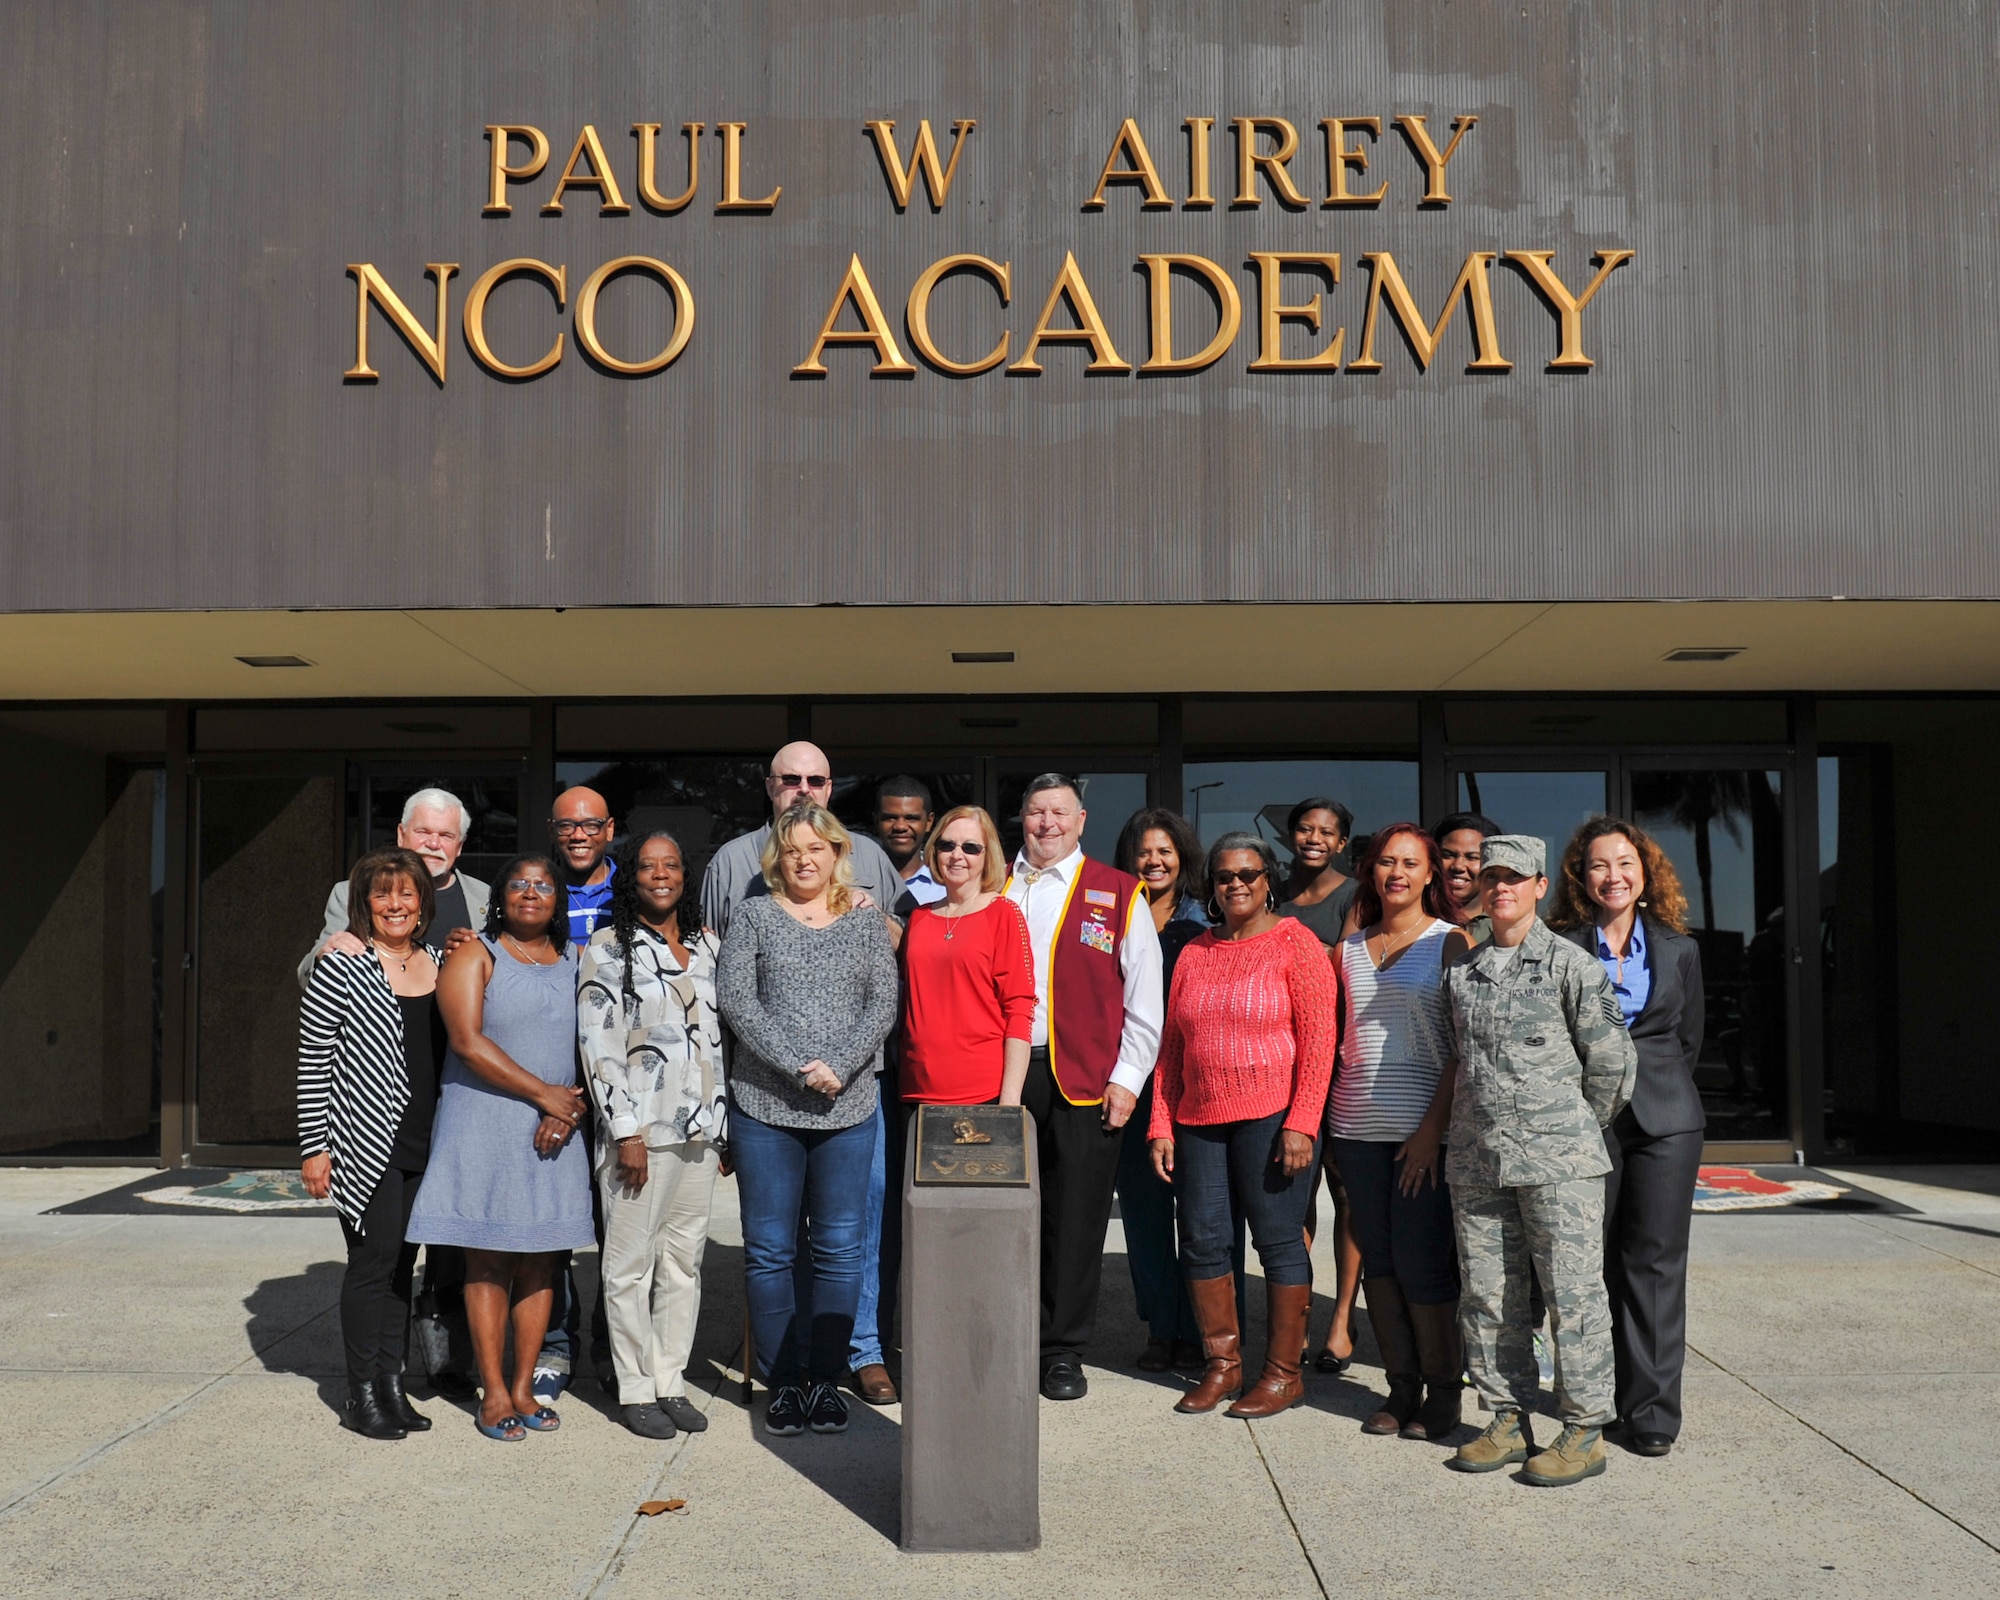 Honorees of the Paul W. Airey NCO Academy’s Legacy of Valor event gather in front of the academy at Tyndall Air Force Base, Fla., Dec. 13, 2016. During the event, honorees toured the NCO Academy and were given a chance to see the rooms named after them or their loved ones. (U.S. Air Force photo by Senior Airman Dustin Mullen/Released)